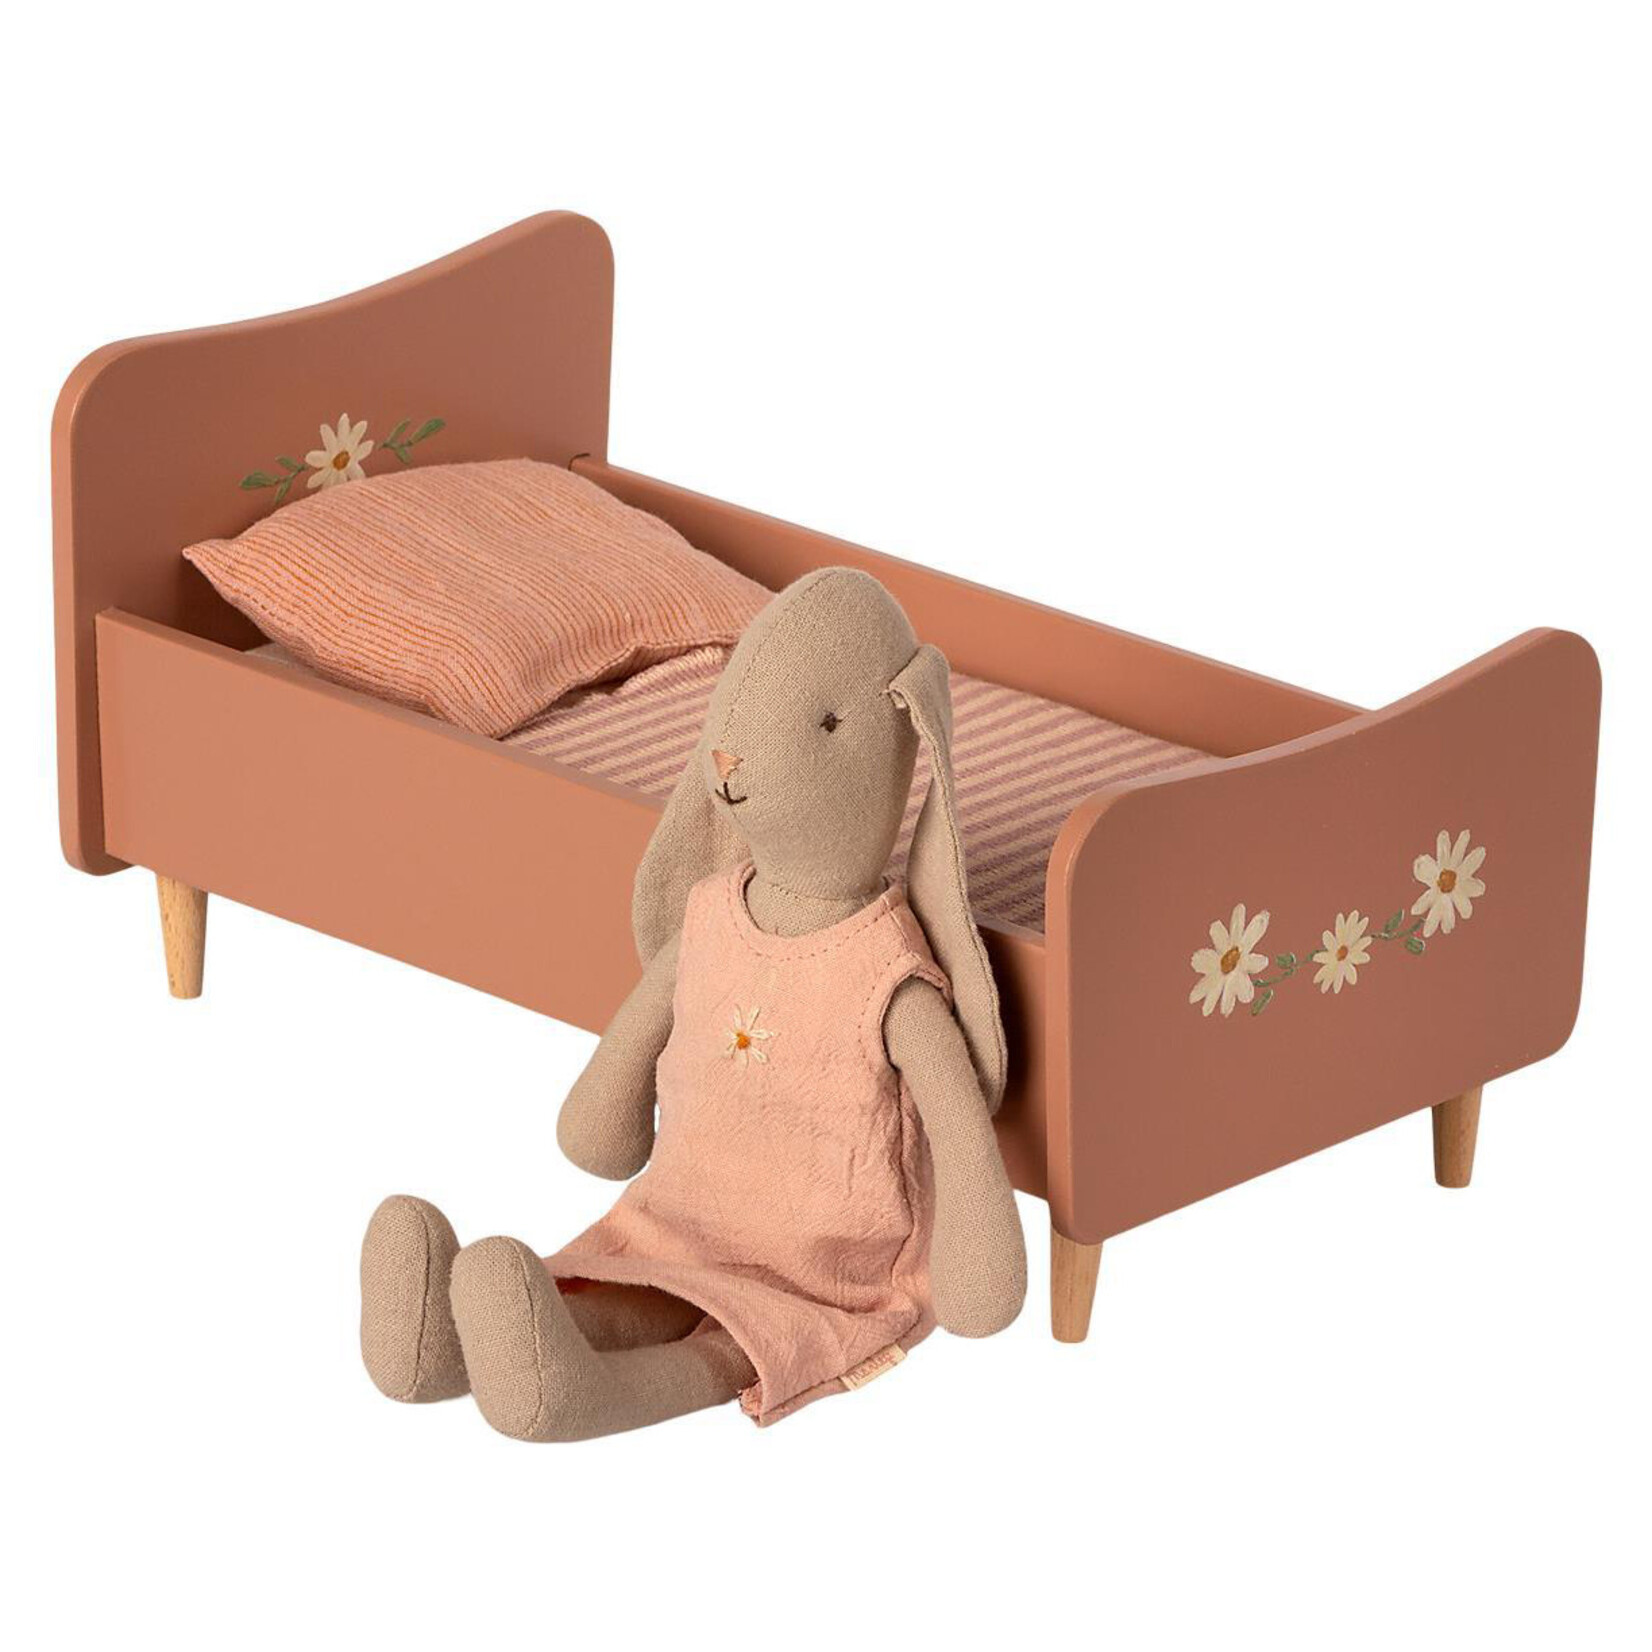 Maileg USA Wooden Bed, Mini-Rose